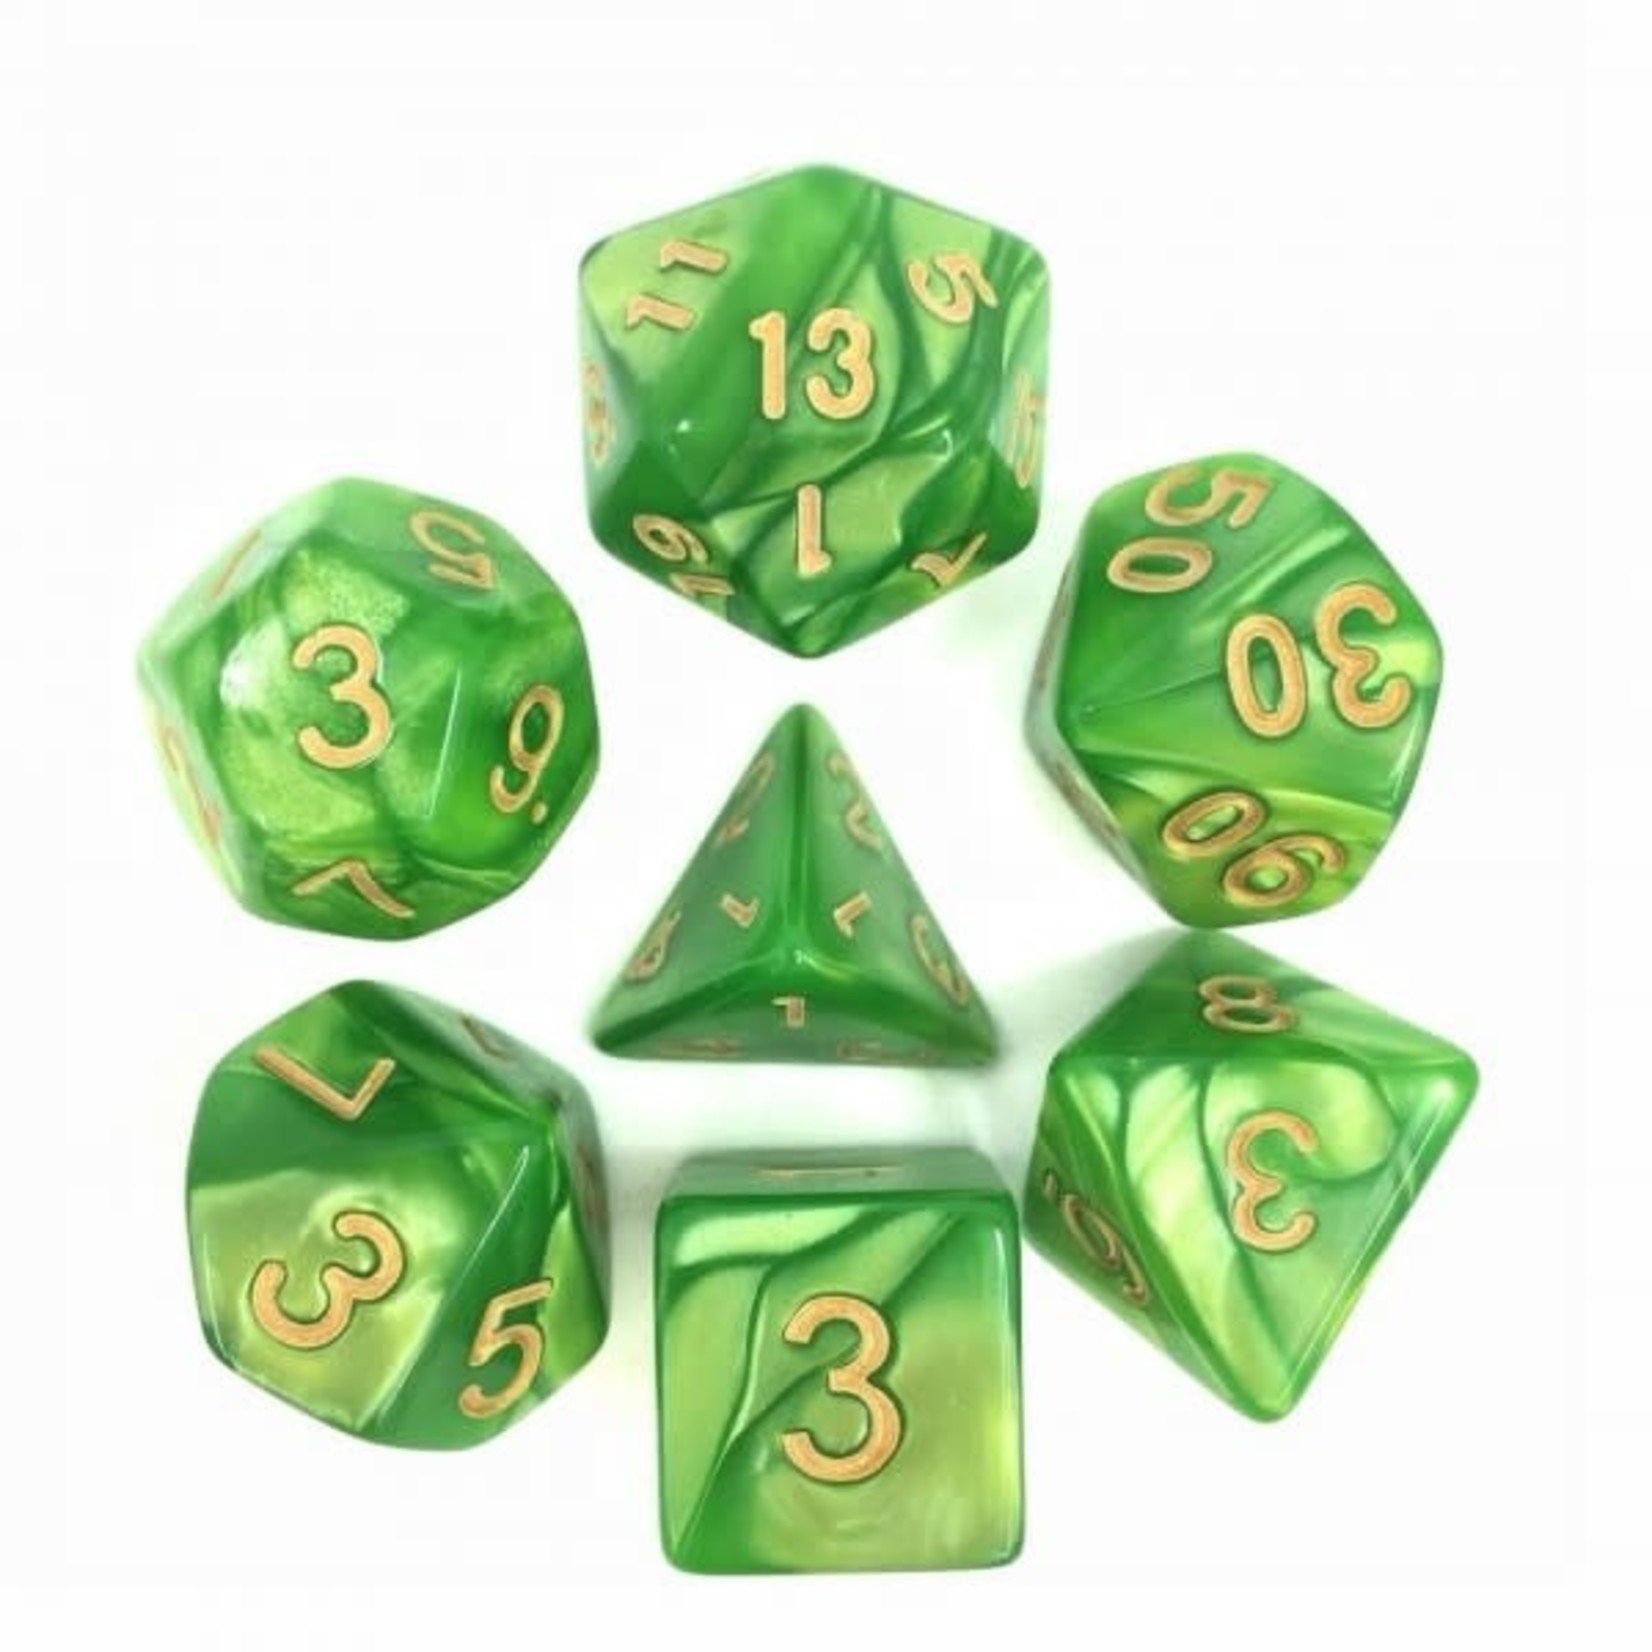 7 Set Polyhedral Dice - Light Green Pearl Gold Font